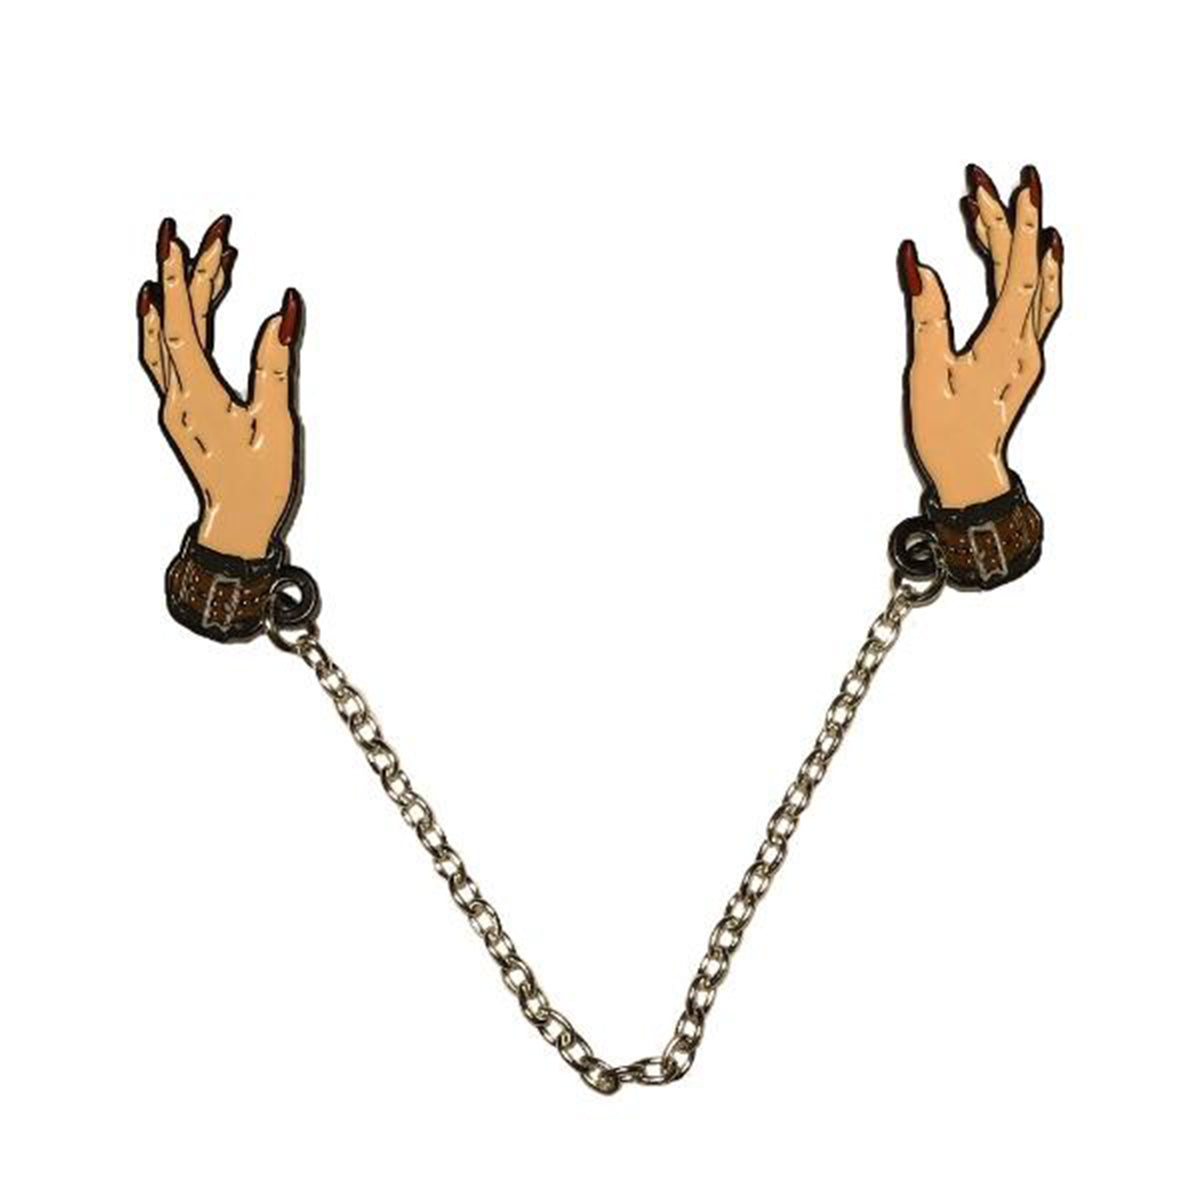 Geeky & Kinky Chains of Love Hands 7" Duo Pin